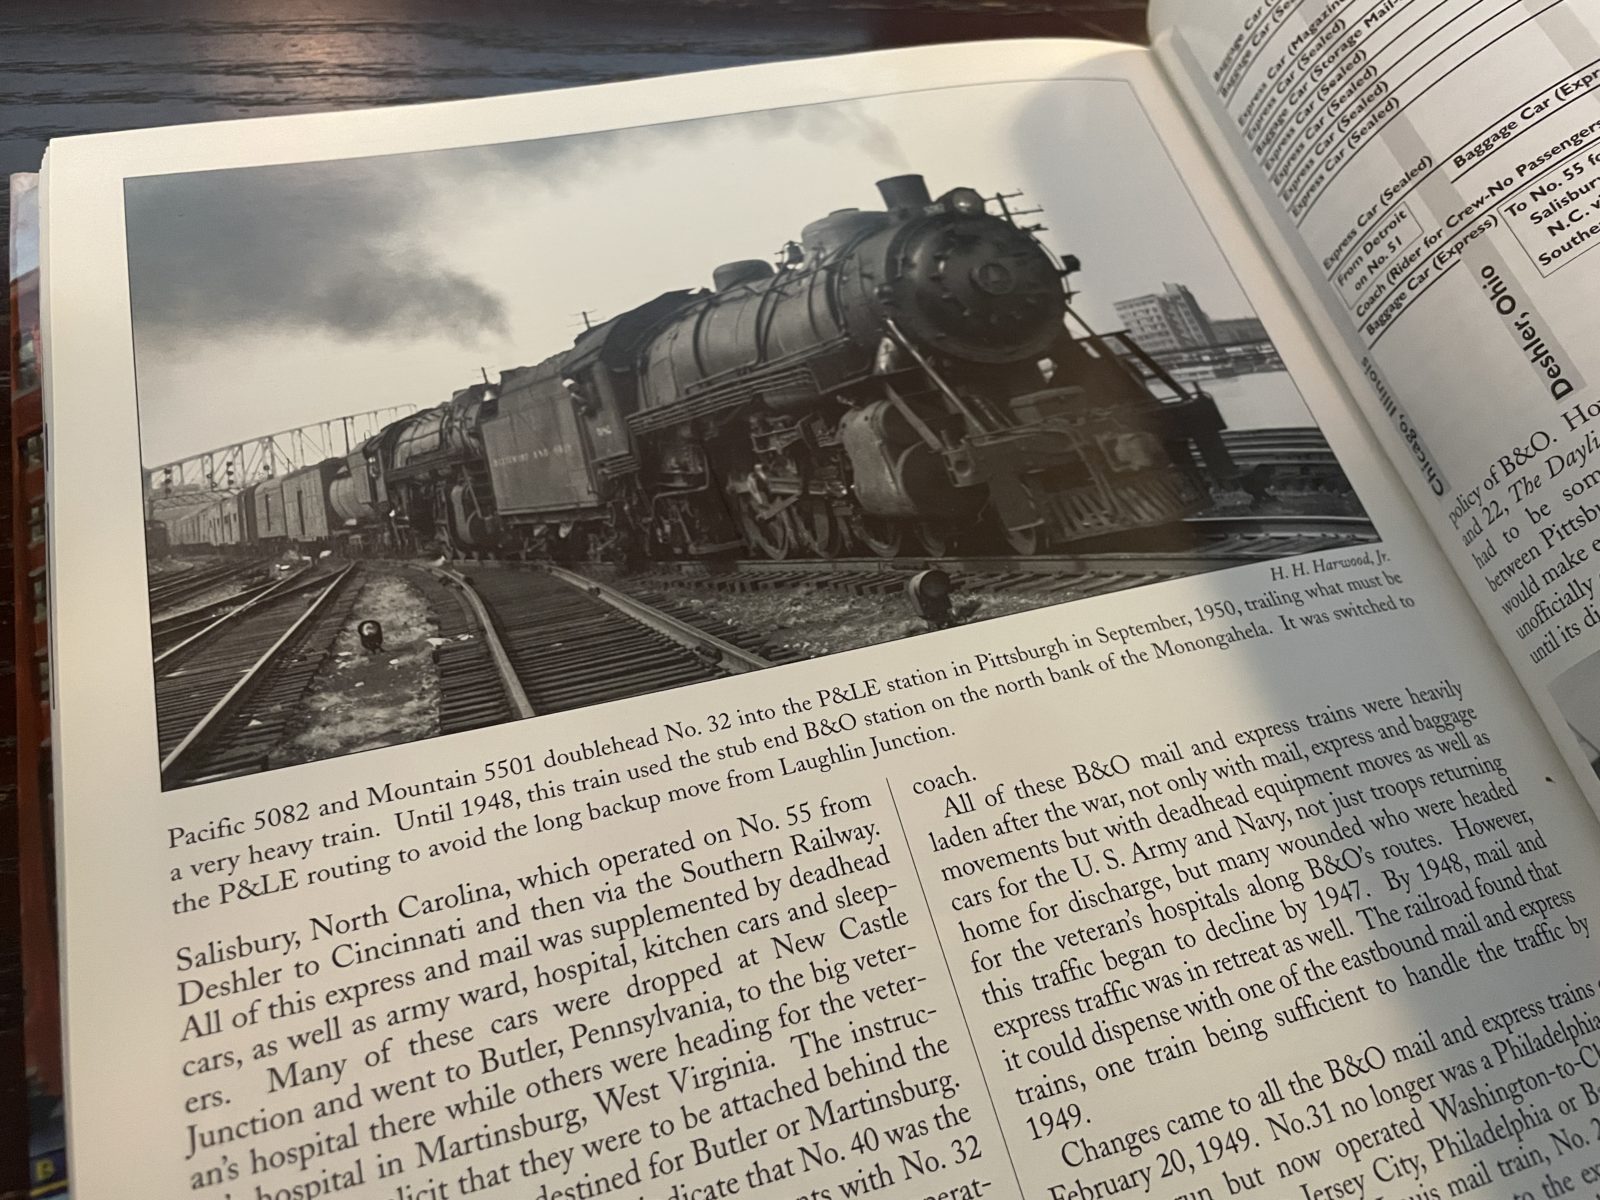 "Baltimore & Ohio Passenger Service, 1945-1971 - Volume 2: The Route of the Capitol Limited" by Harry Stegmaier